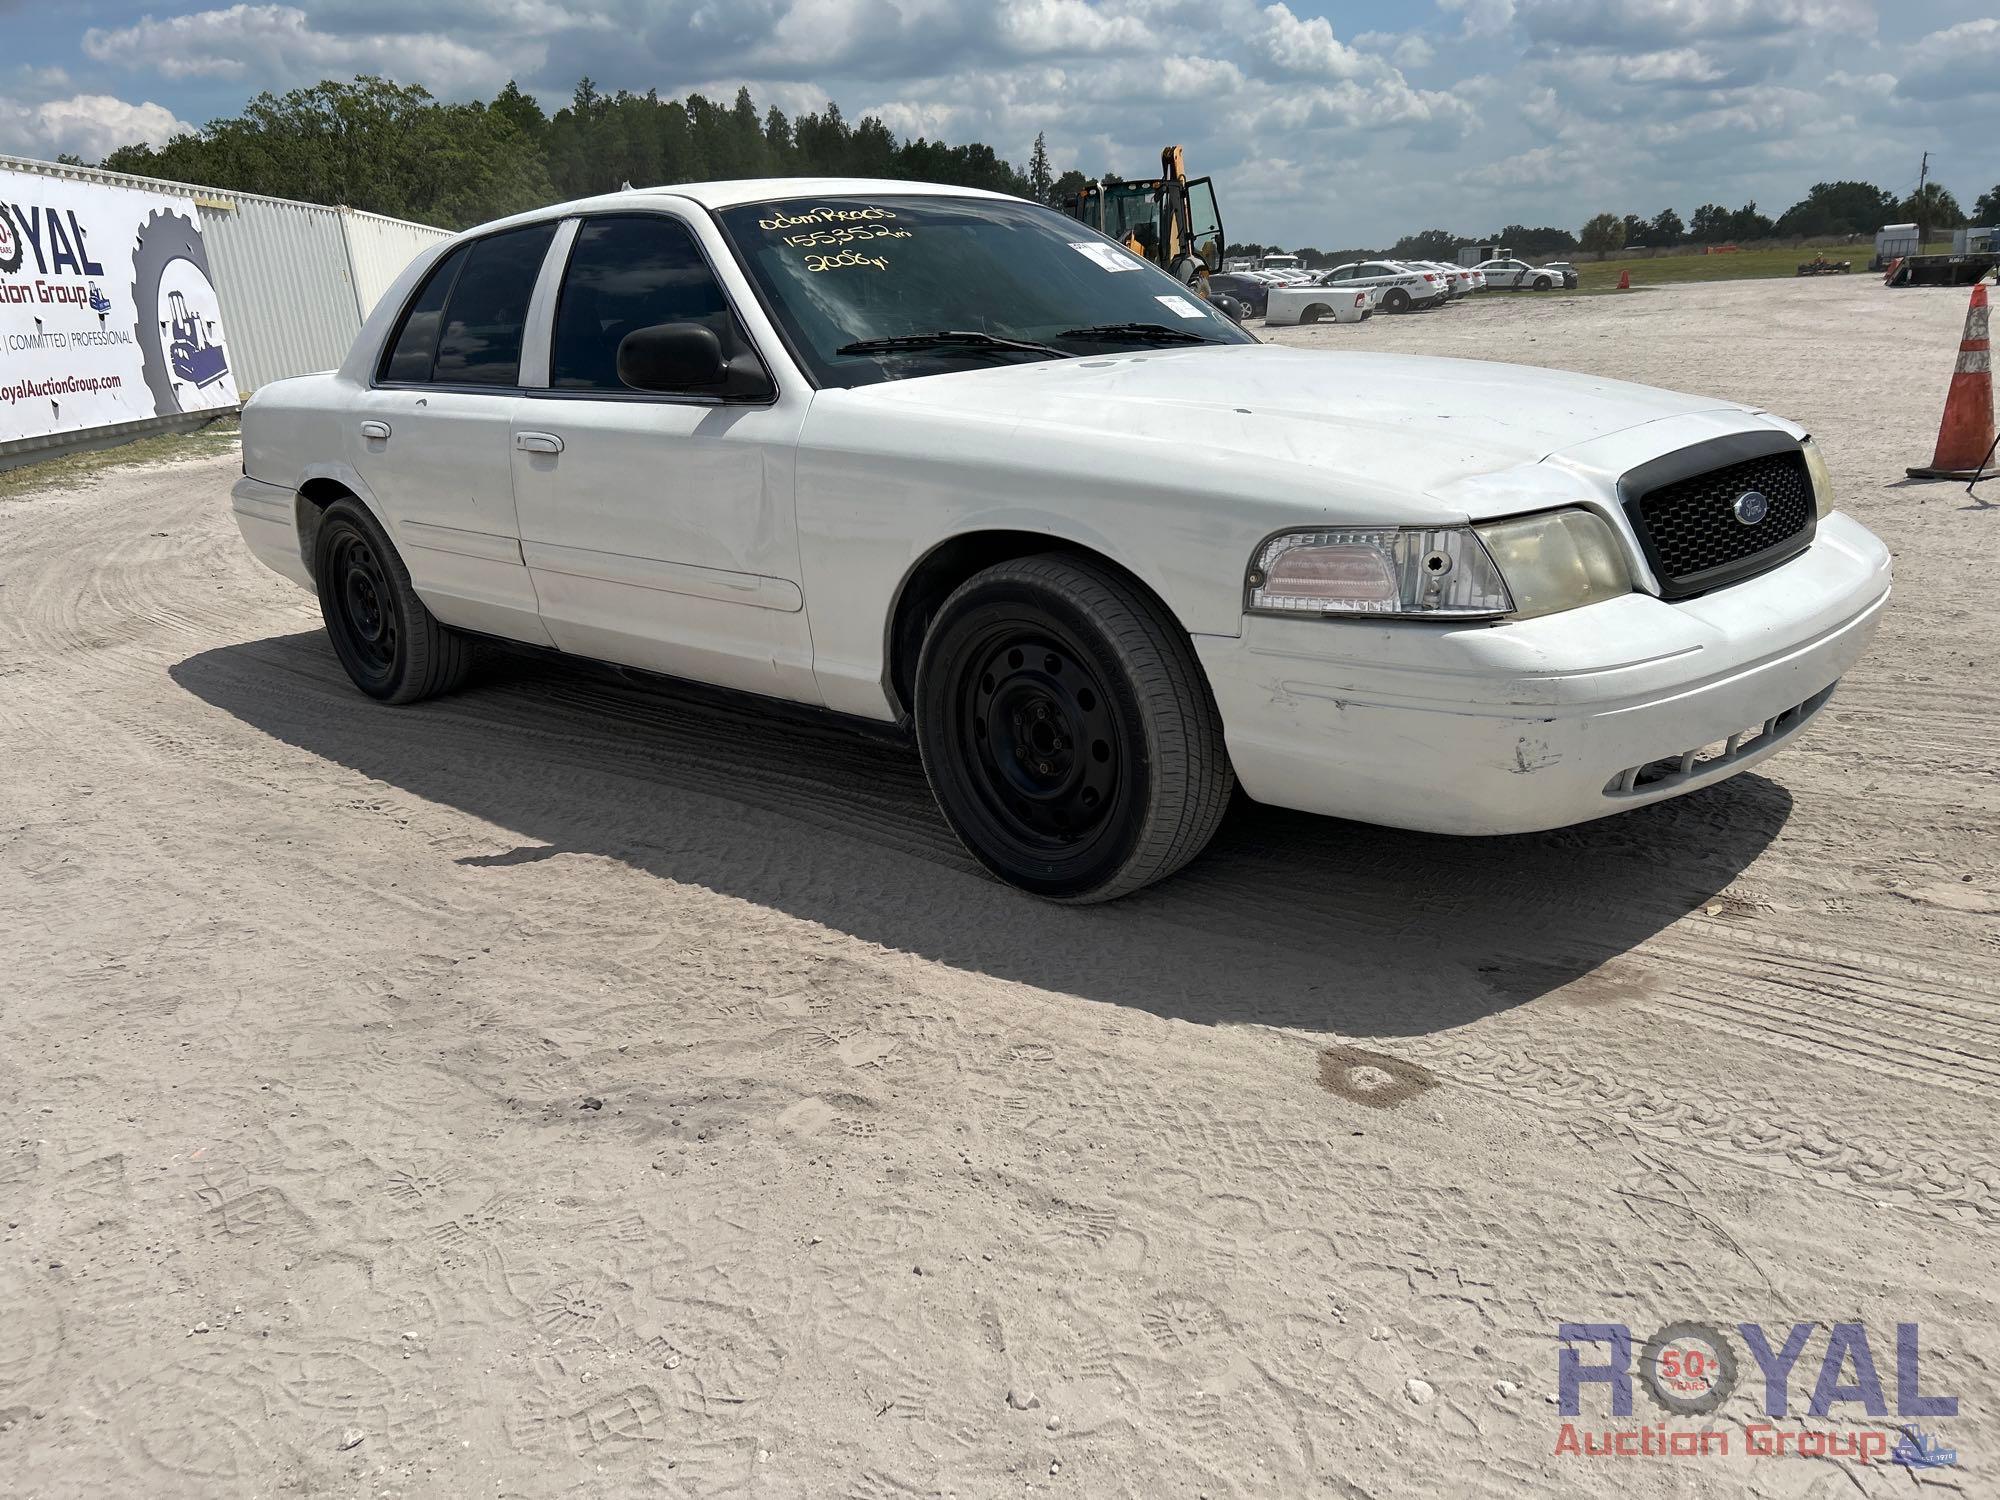 2008 Ford Crown Victoria Police Cruiser